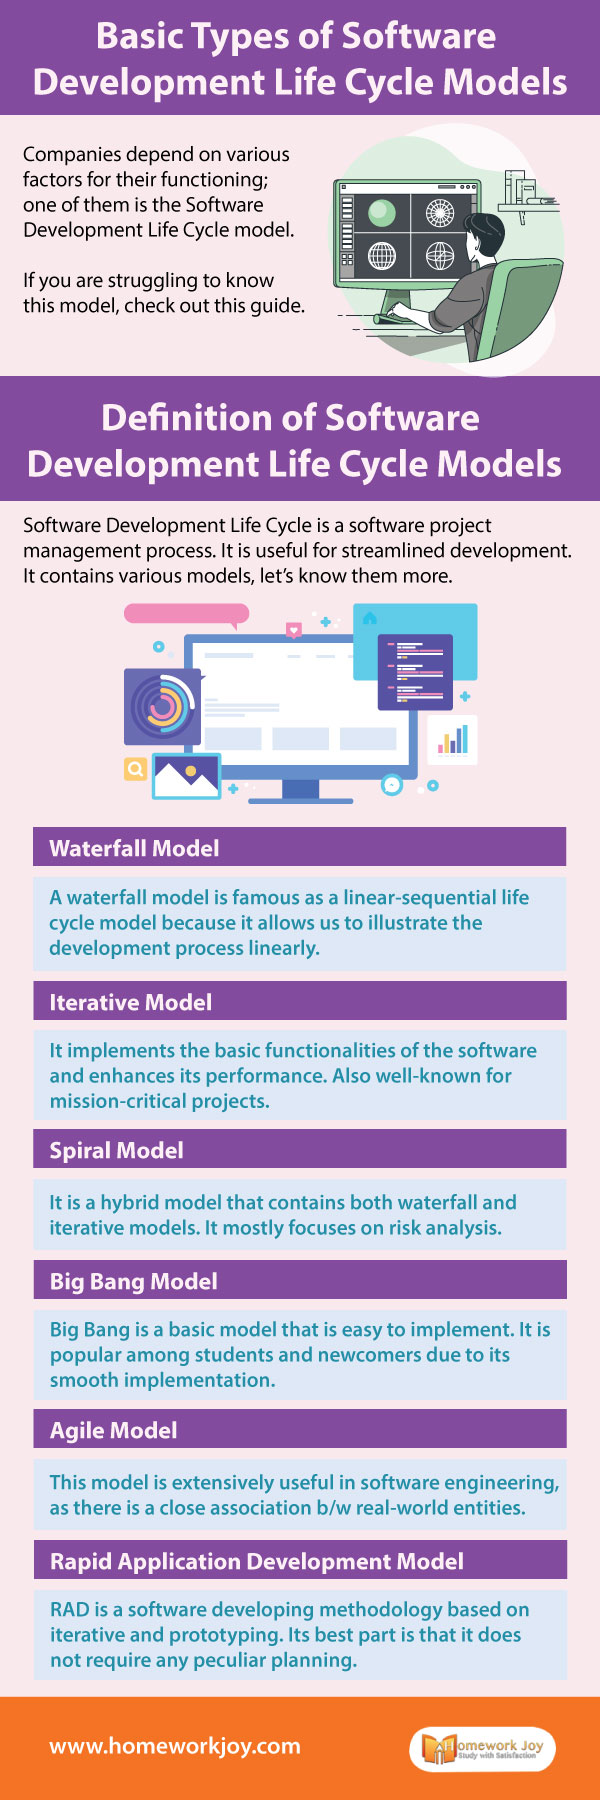 Basic Types of Software Development Life Cycle Models